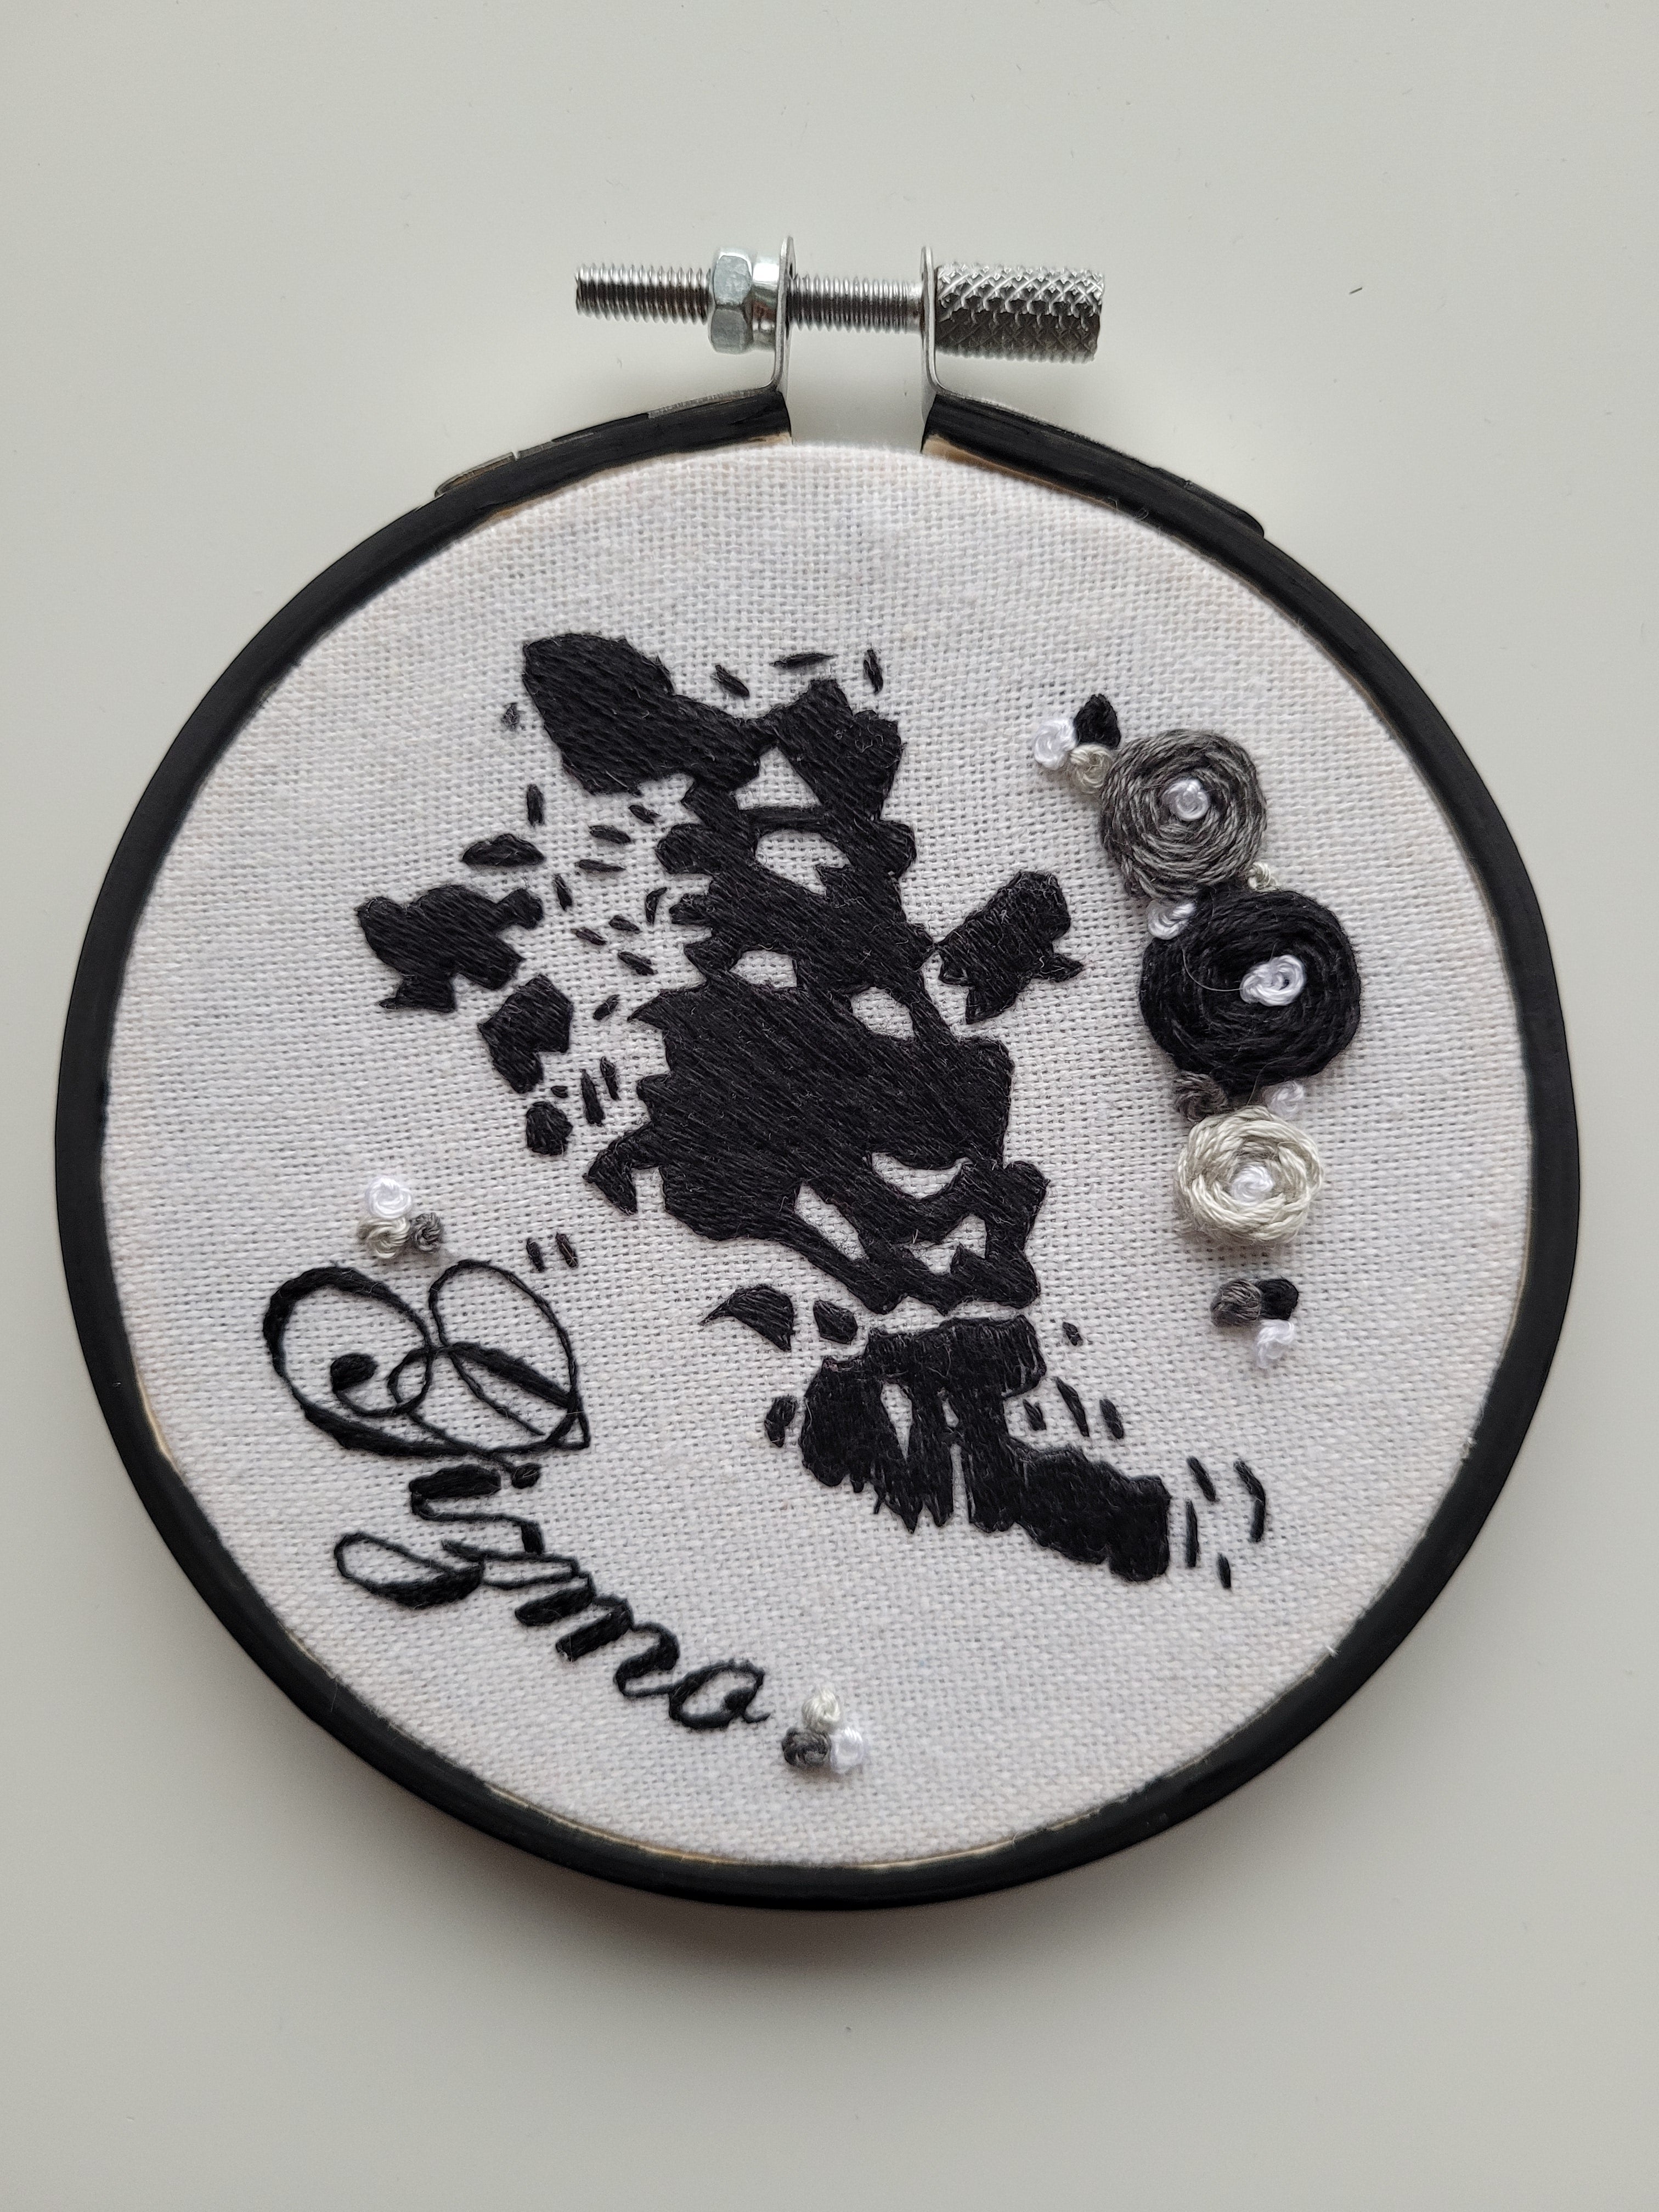 embroidery hoop 4 inch pet rabbit paw print with flowers and text "Gizmo"